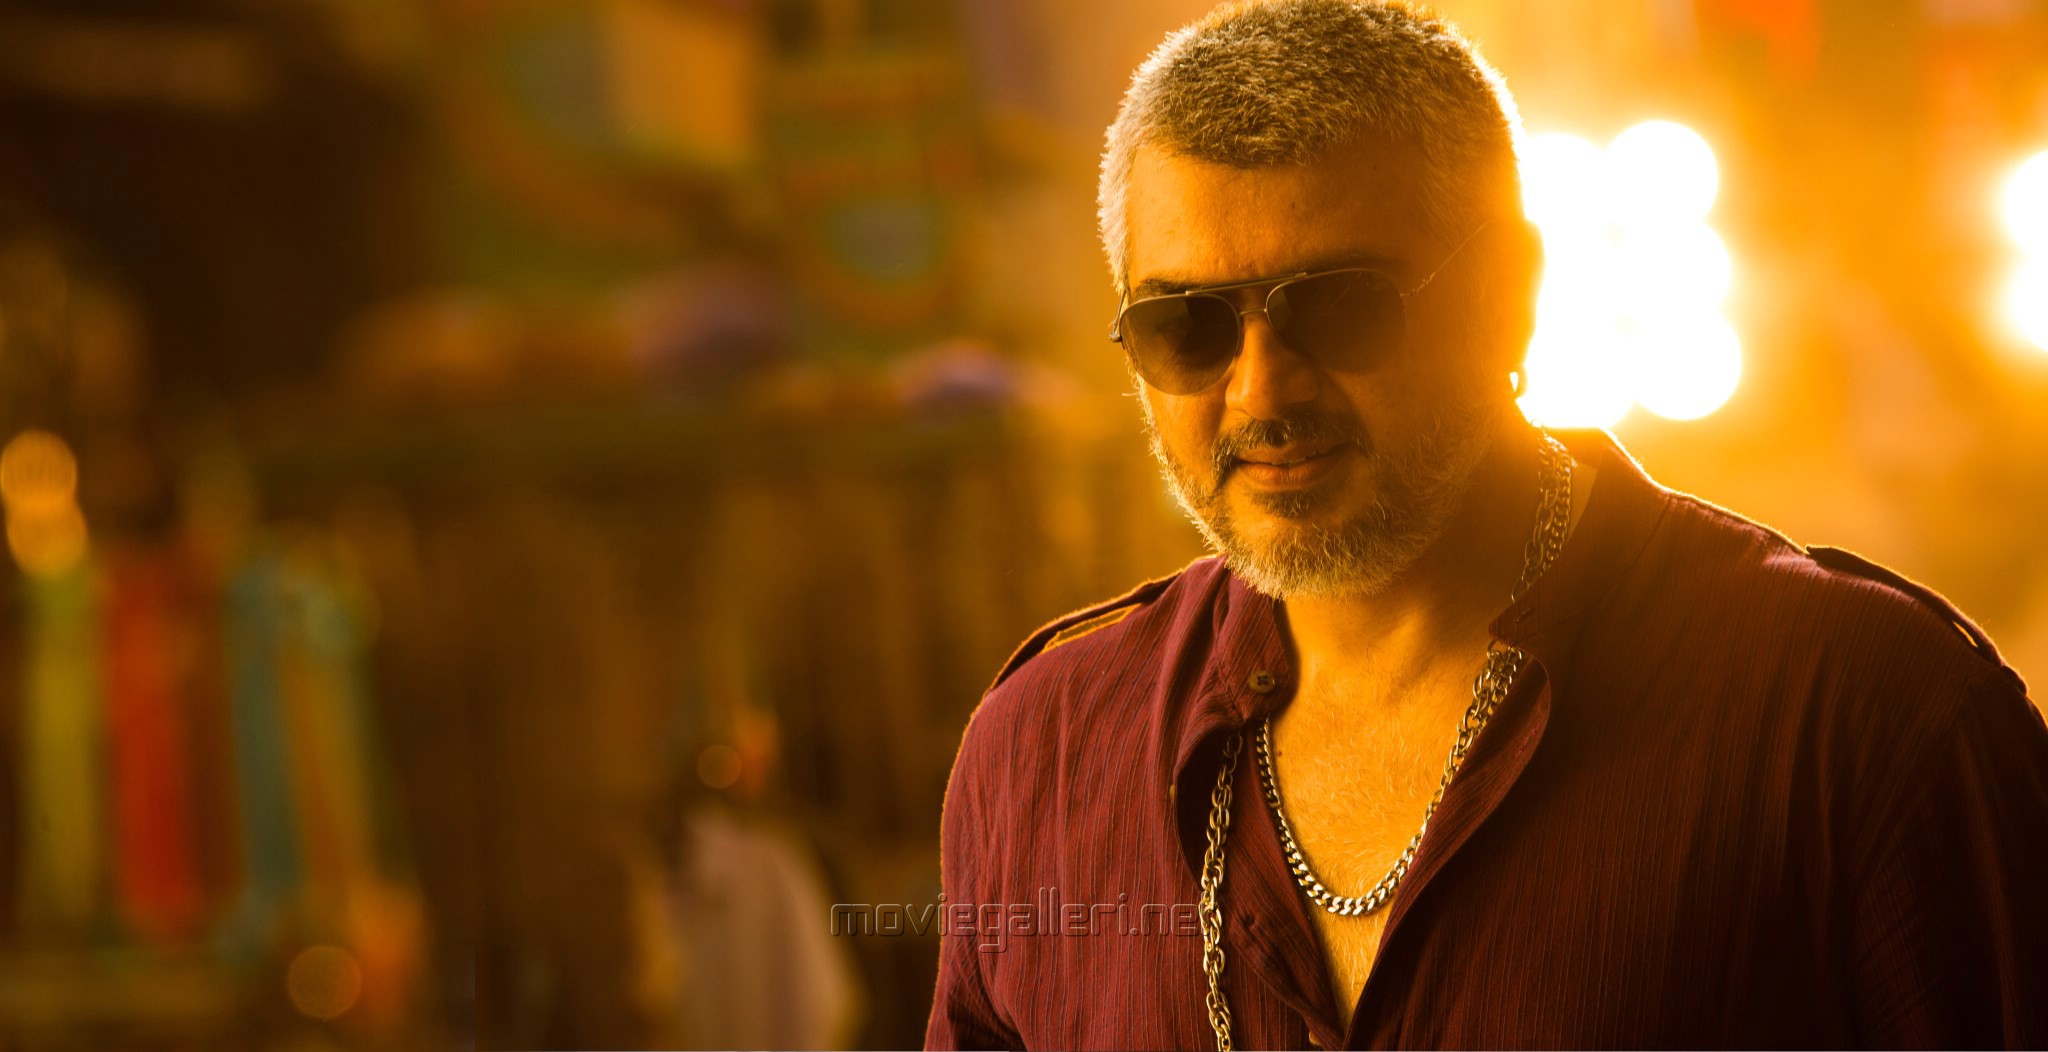 Exquisite Gallery of Over 999 Thala Ajith High-Definition Images, including  Full 4K Resolution